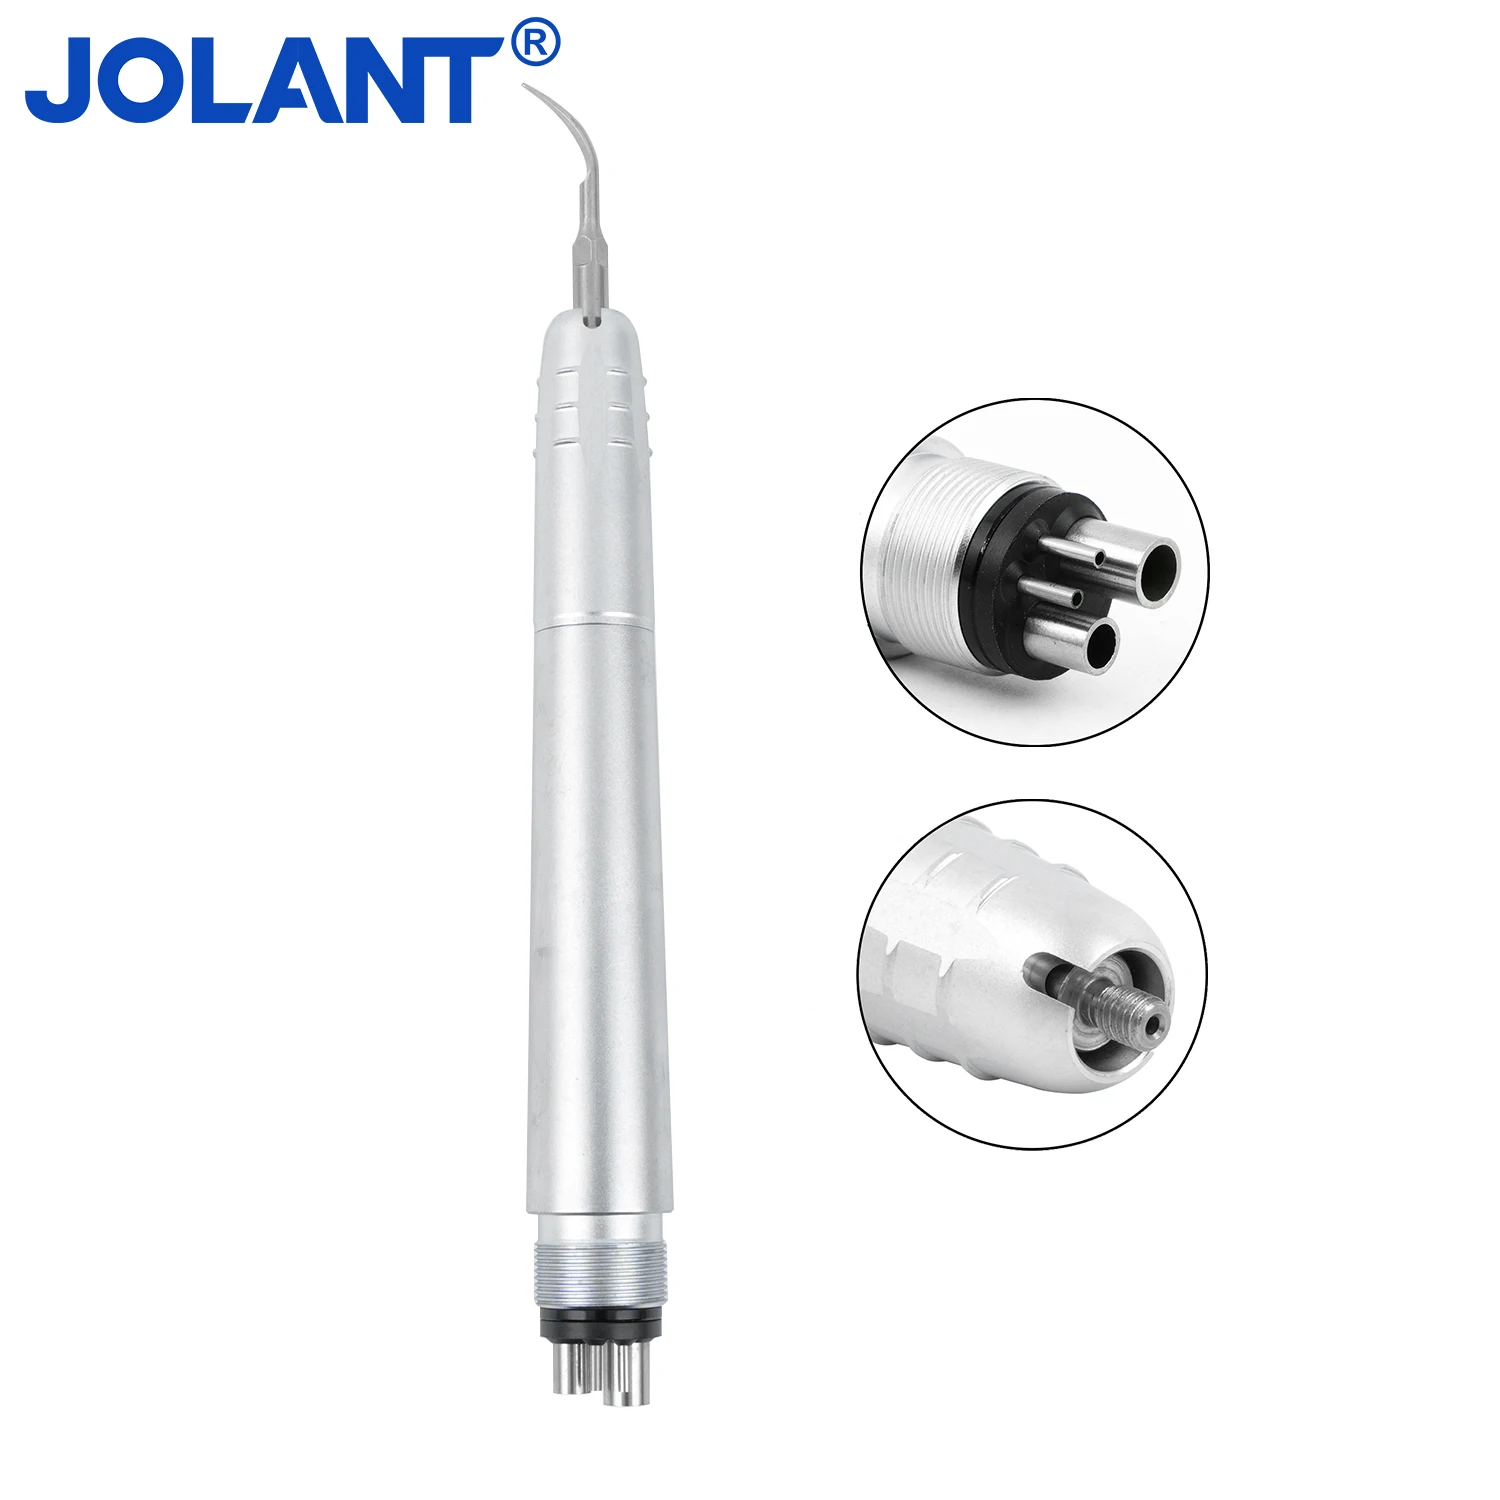 

JOLANT Dental Ultrasonic Air Scaler Handpiece Sonic Perio Scaling with 3 Tips 2 Hole/ 4 Hole Dentist Tools